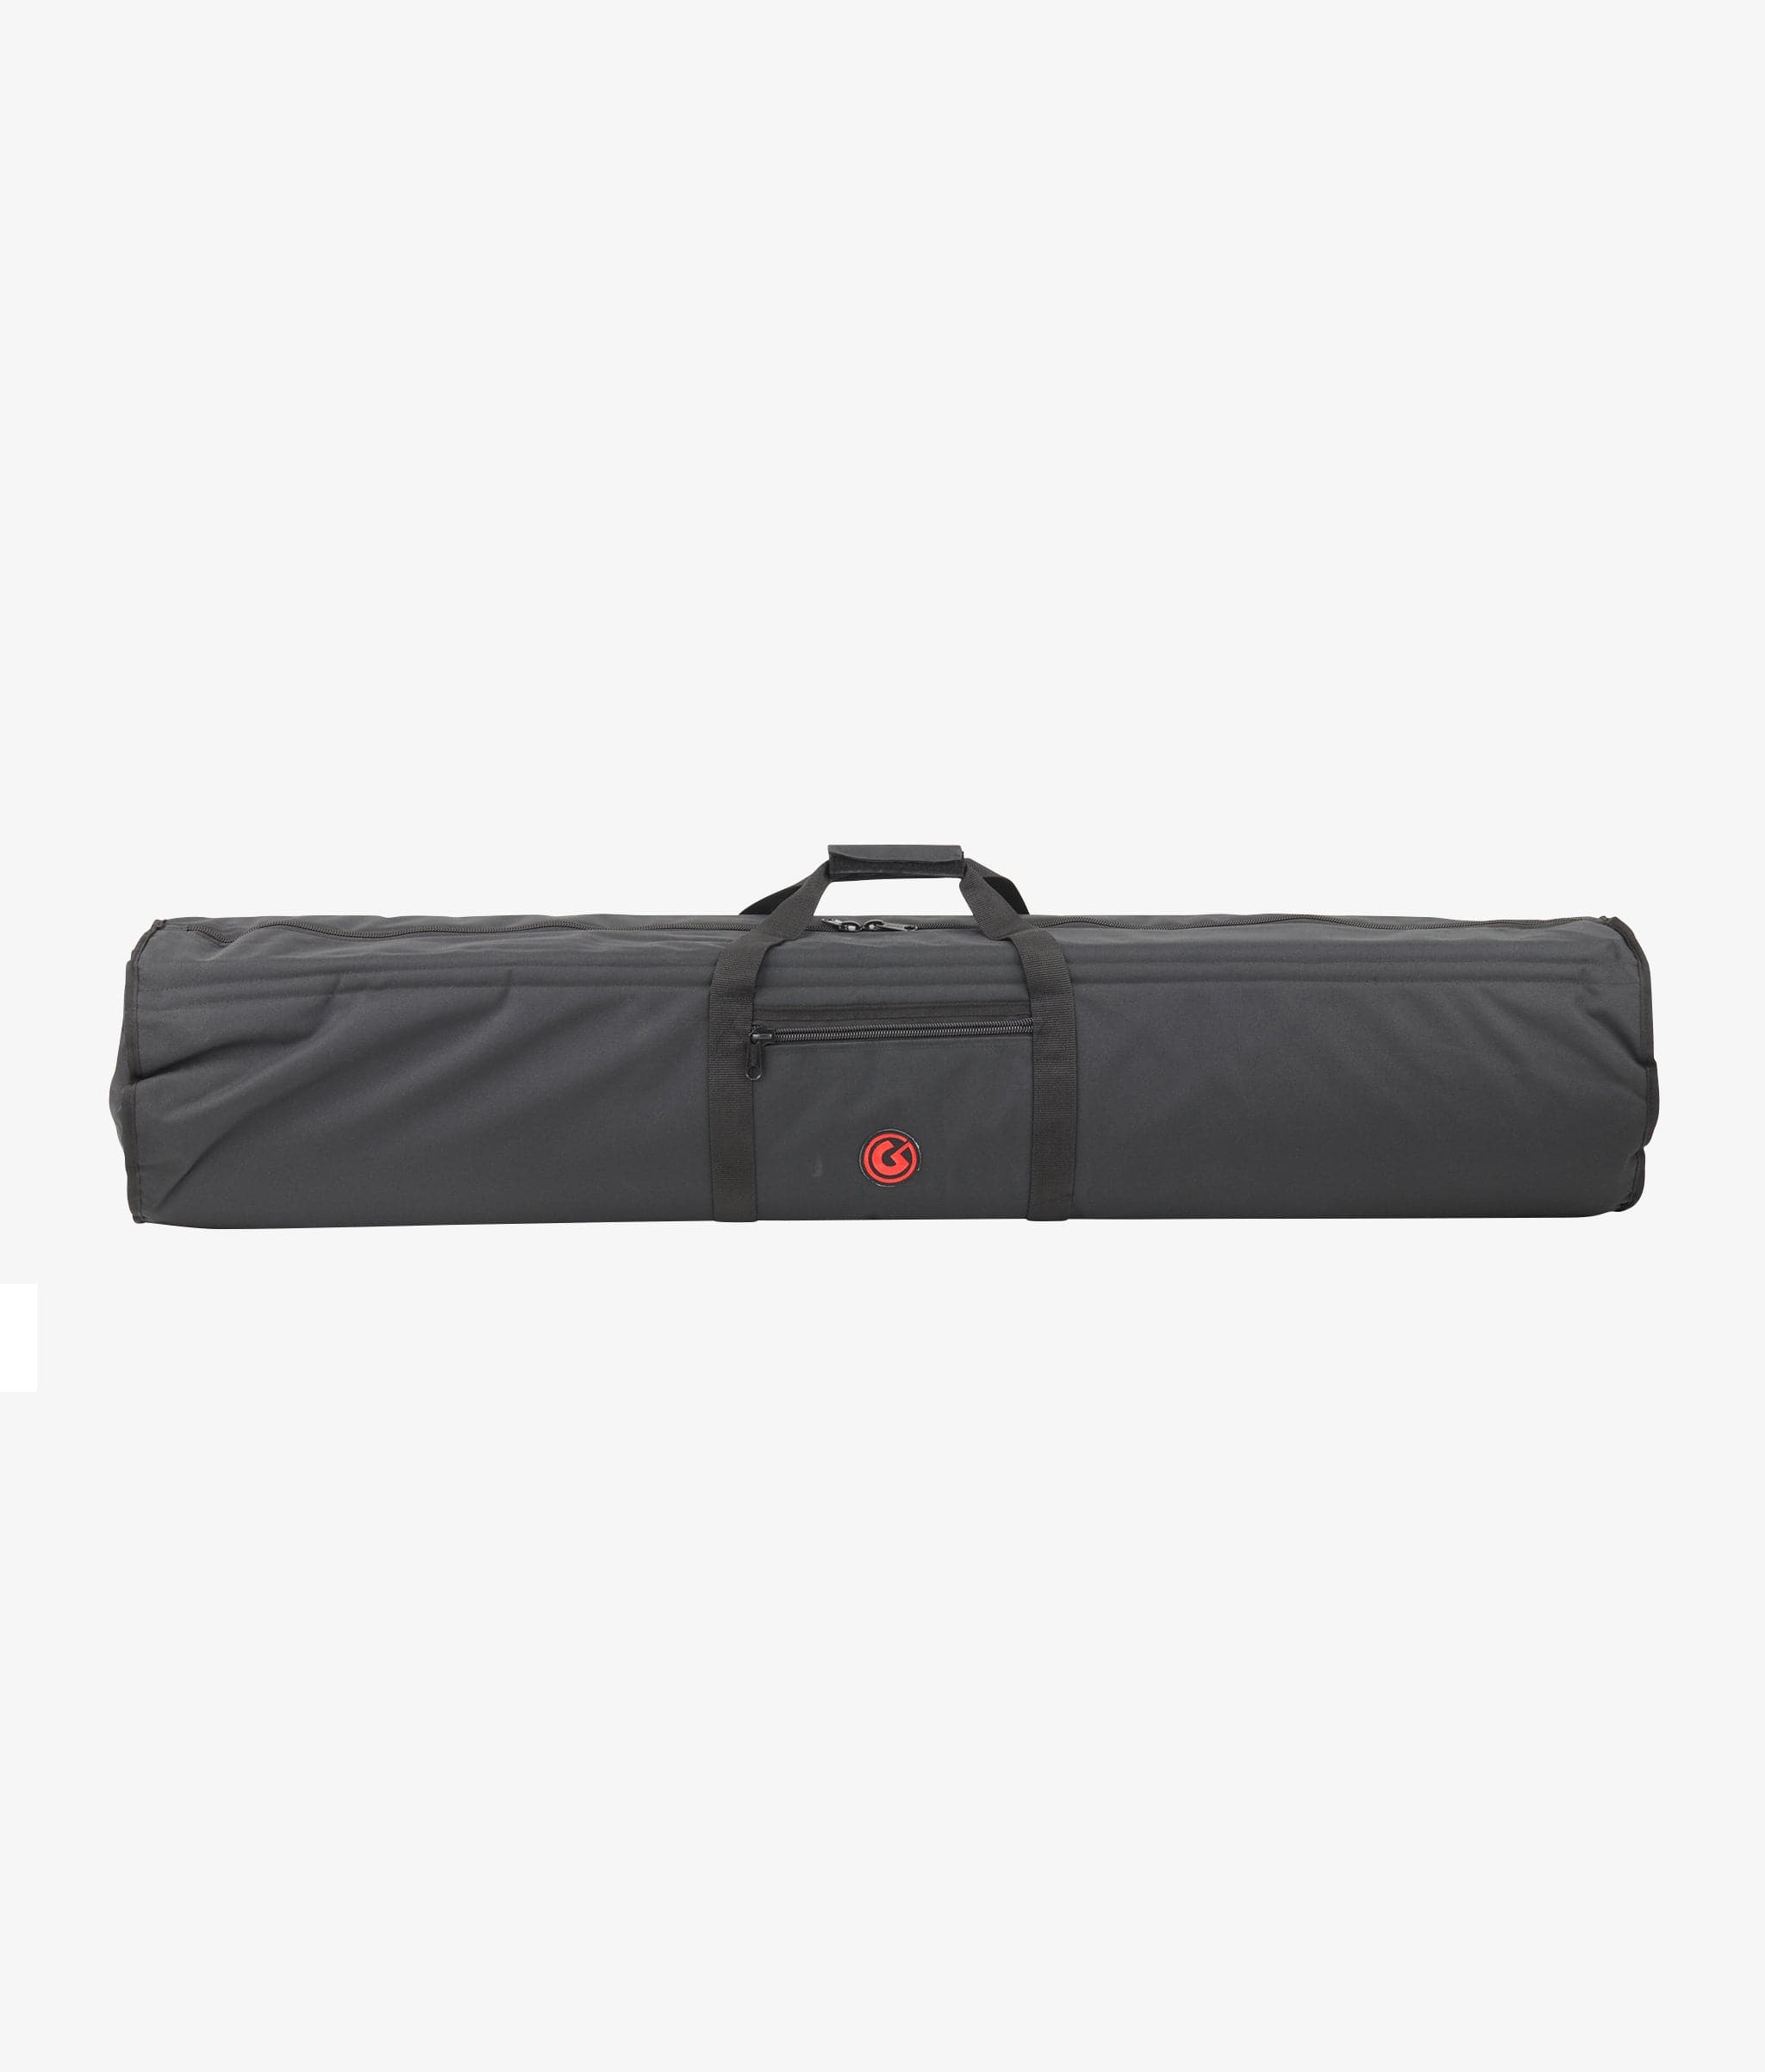 Secure Transportation for Your Drum Gear: Buy Drum Hardware Cases & Bags |  Barton Drums